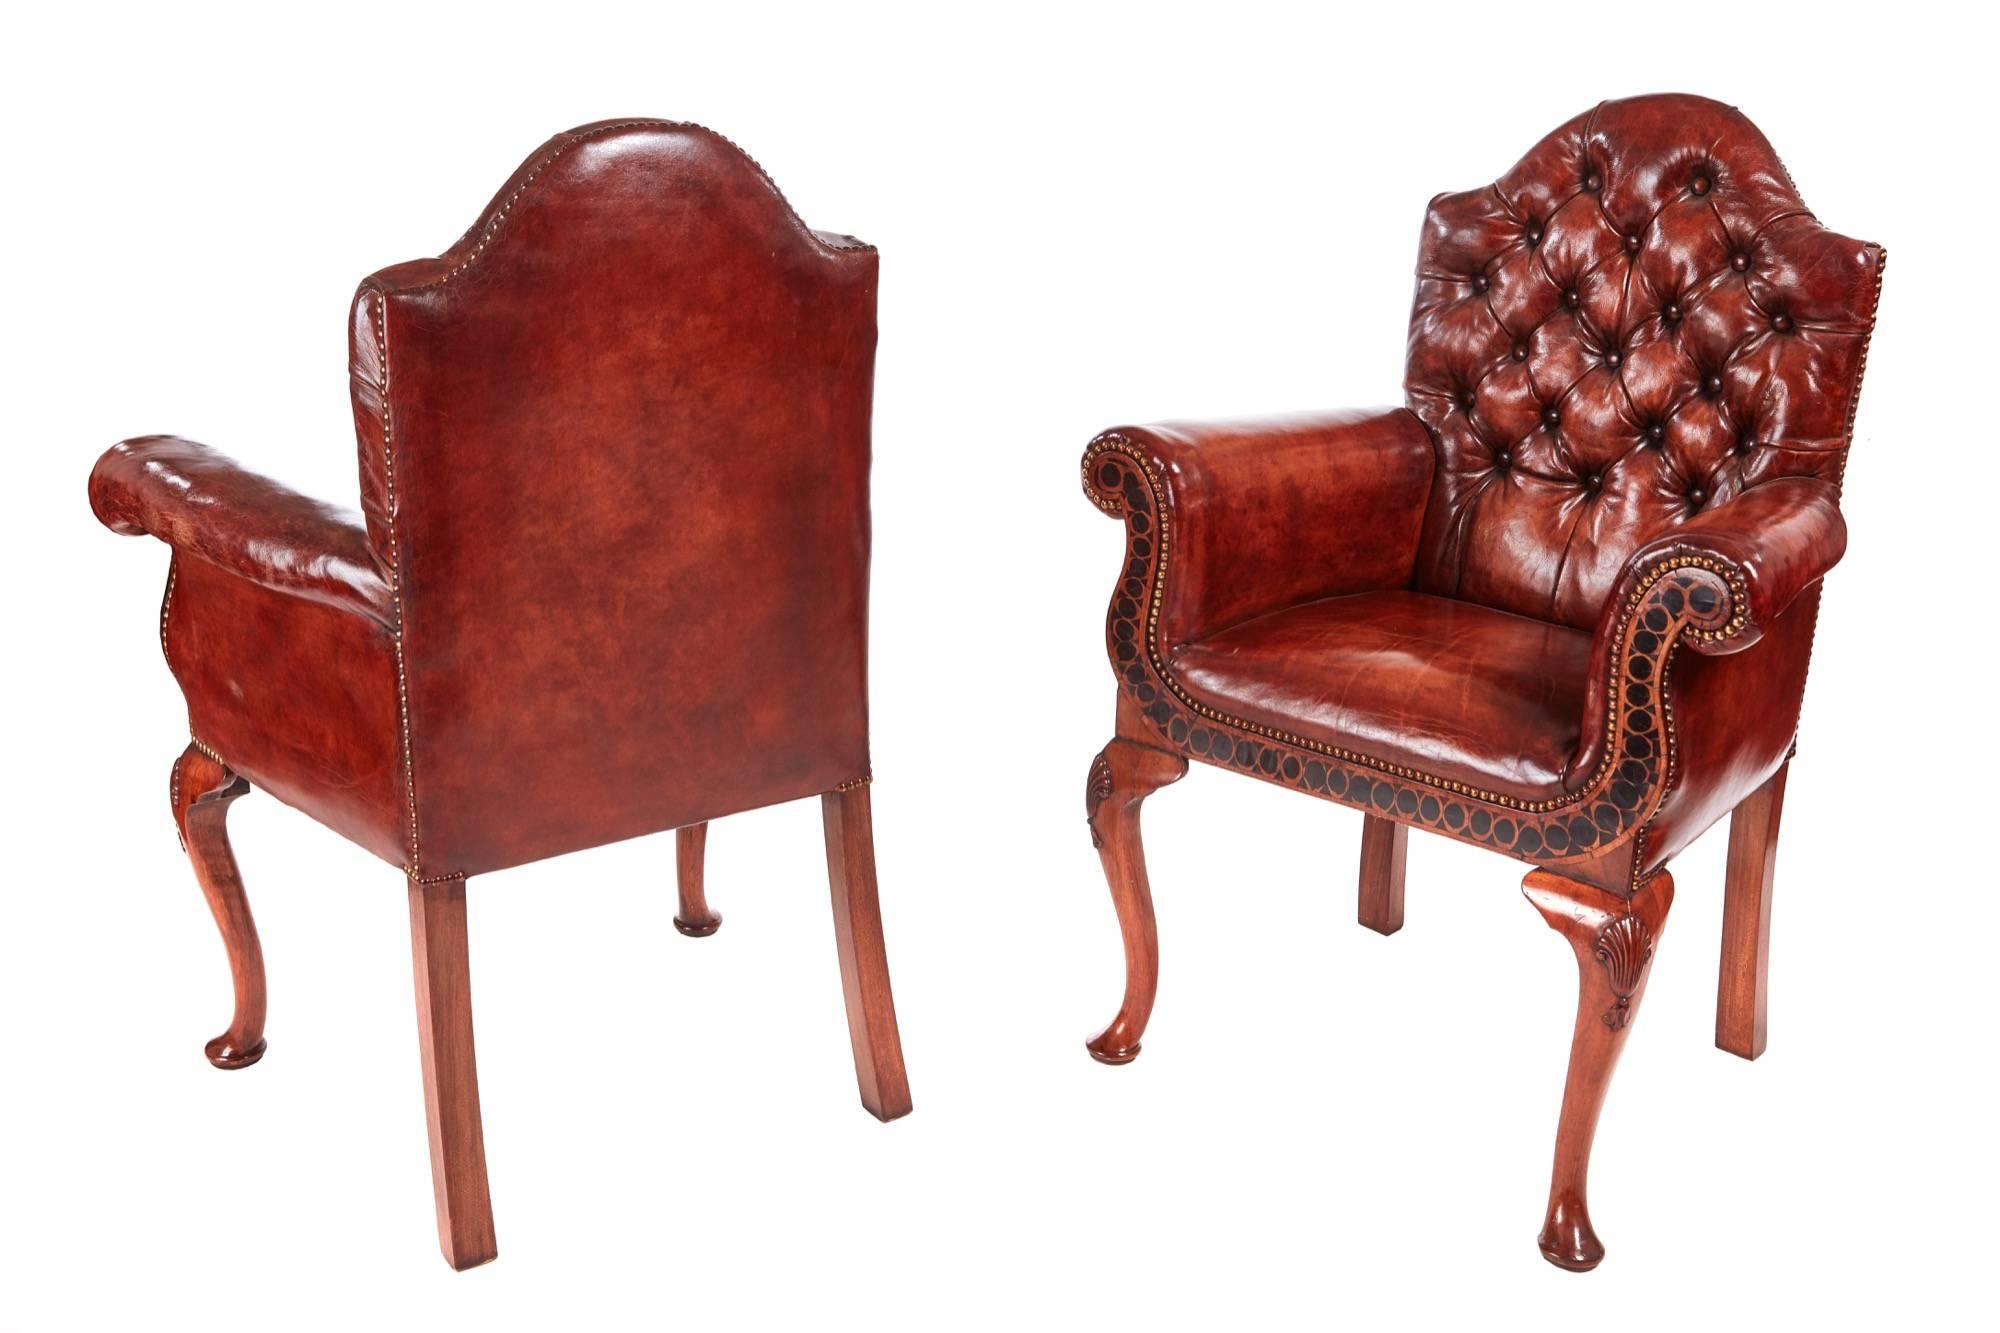 Outstanding quality pair of antique leather buttoned back library chairs, newly re-upholstered seats and deep buttoned backs, unusual shaped frieze inlaid with laburnum oyster veneers, standing on lovely carved solid walnut shaped cabriole legs with